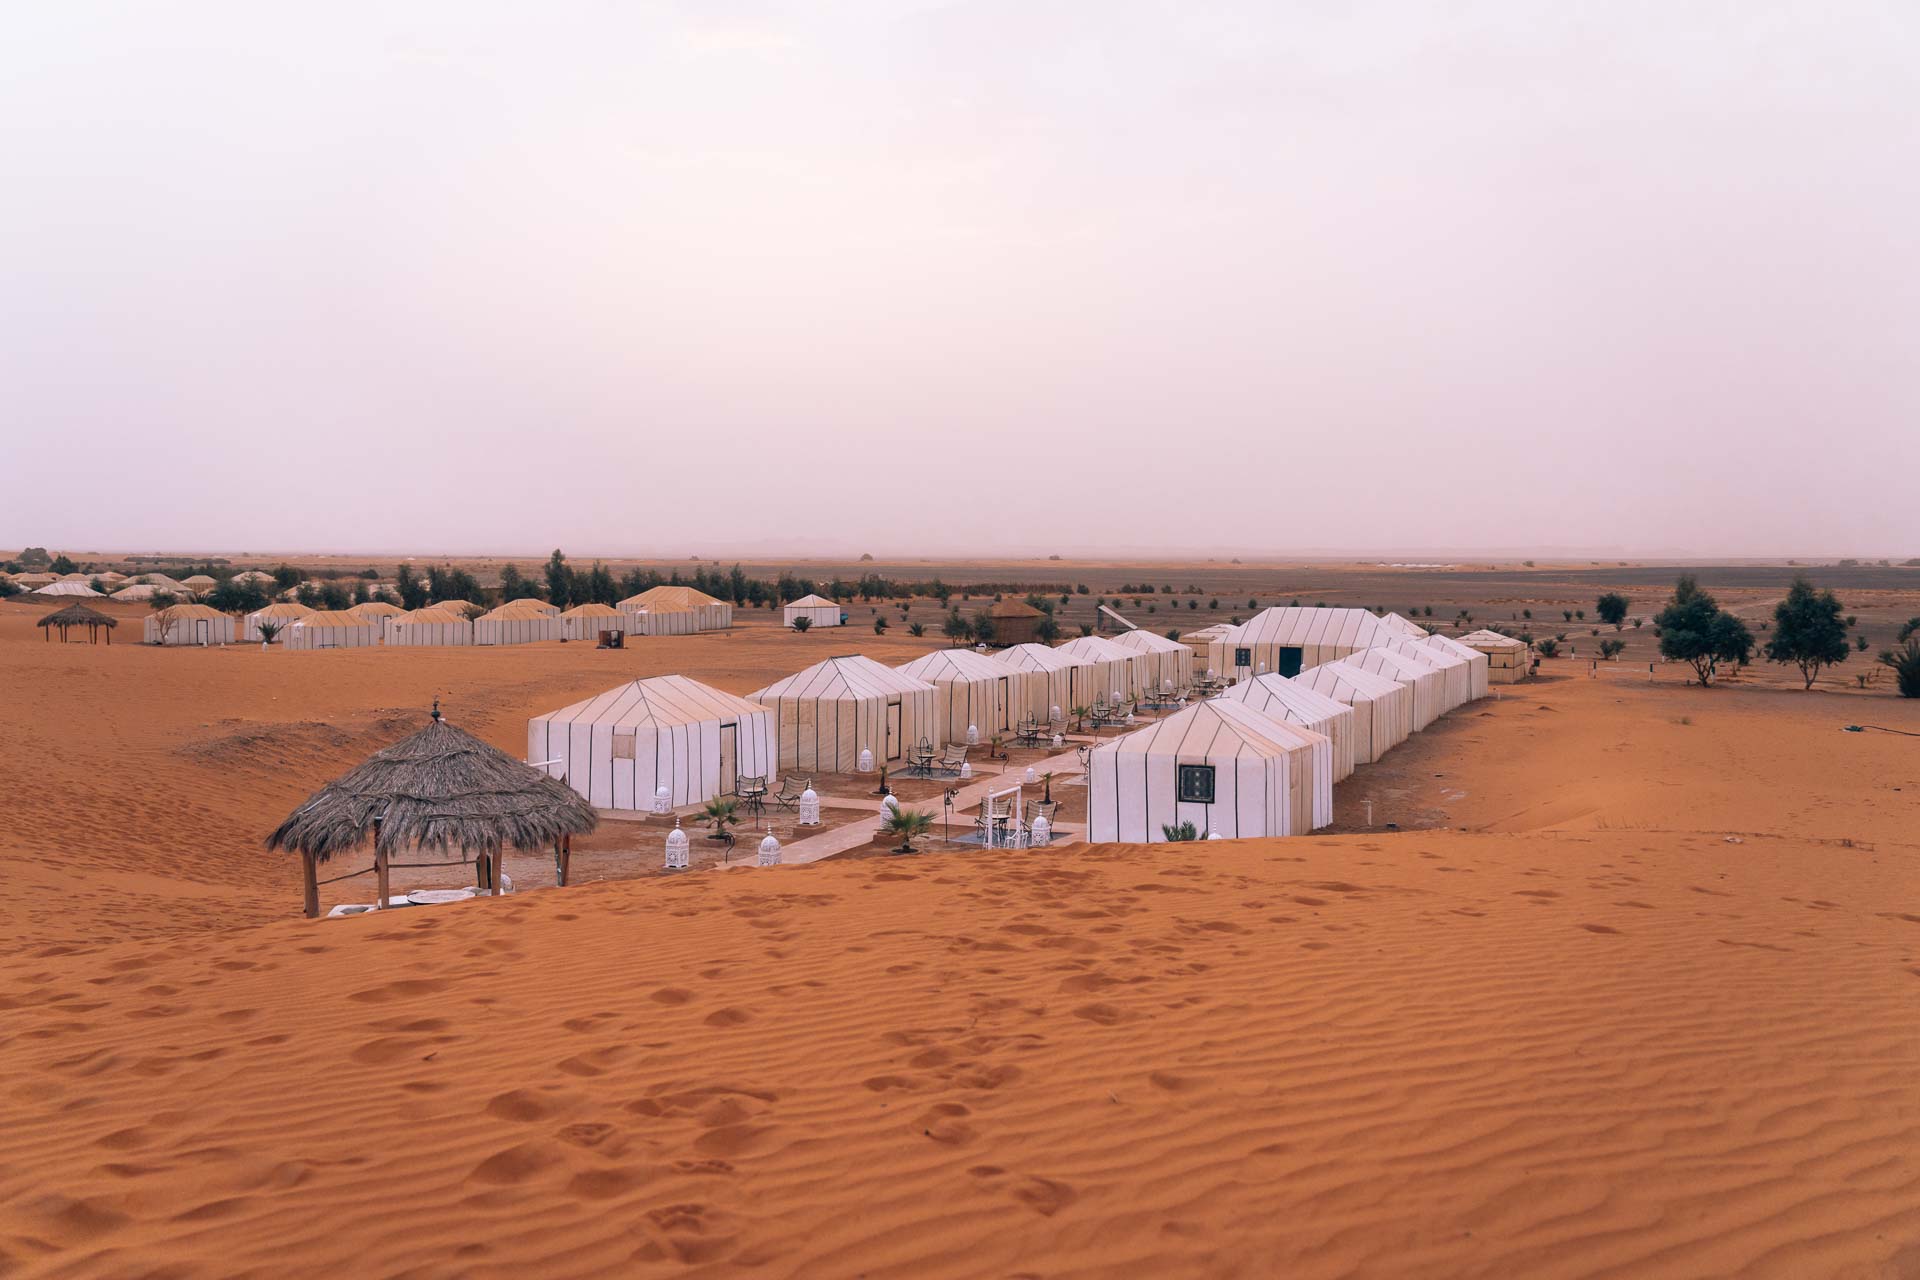 hotels in Morocco - Sahara Luxury Desert Camp - Camp and room shoot65- BLOGPOST HQ